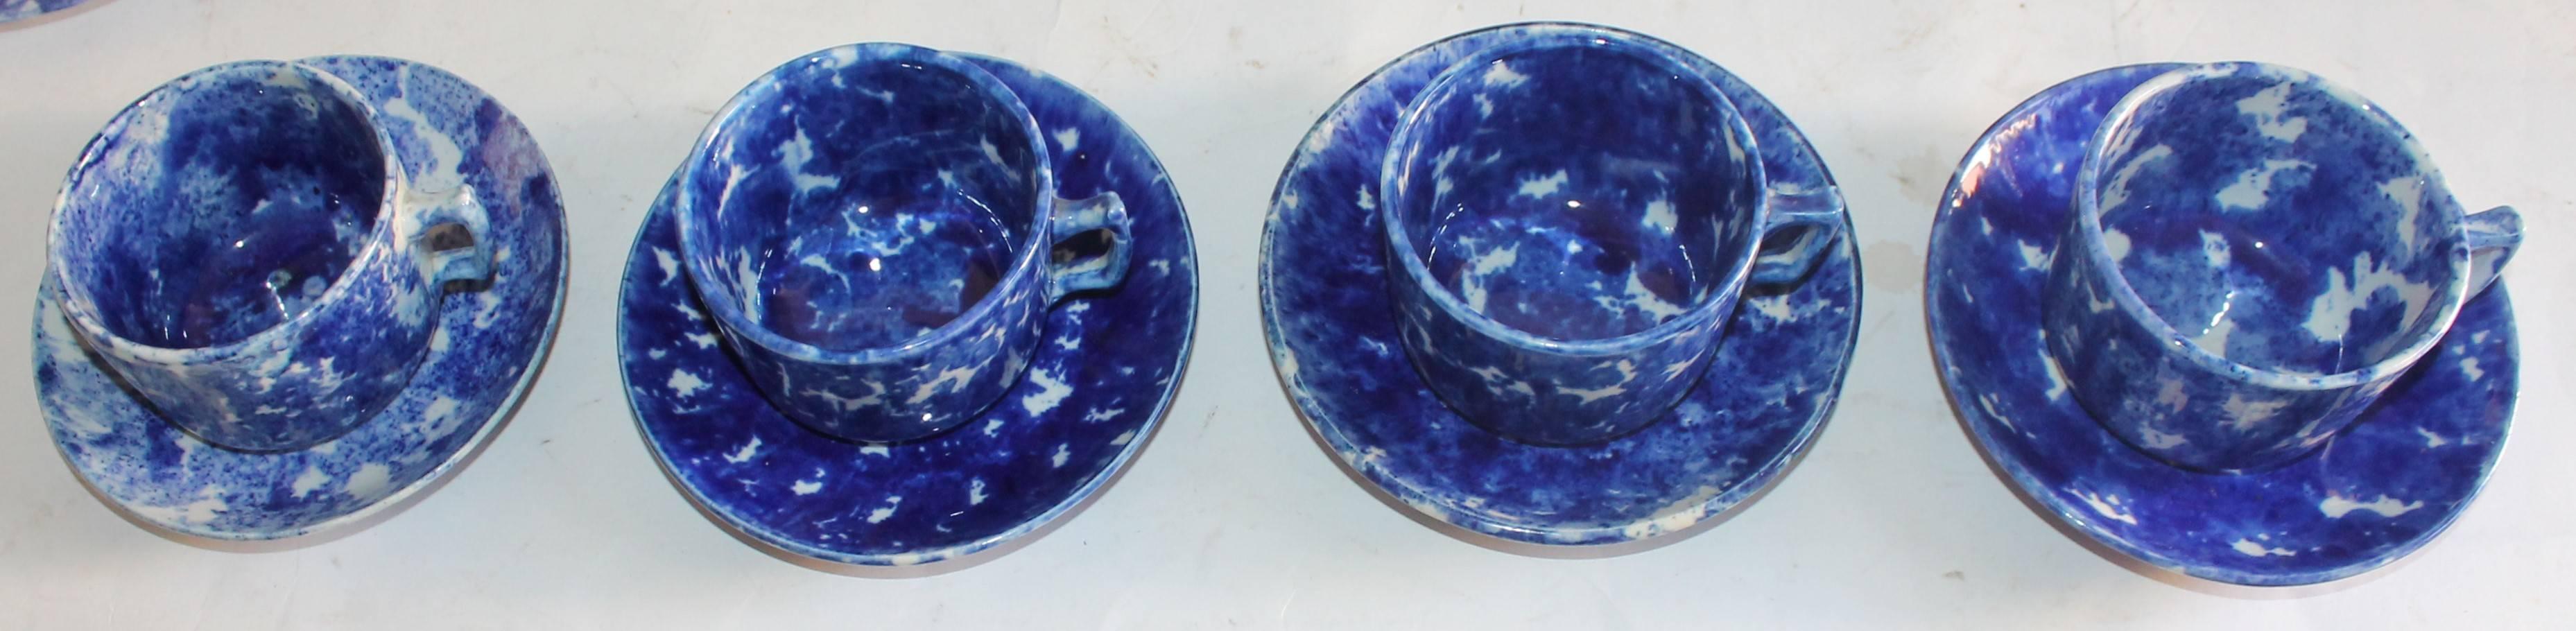 Pottery Set of Spongeware Cups, Plates and Saucers / 16 Pieces Set For Sale